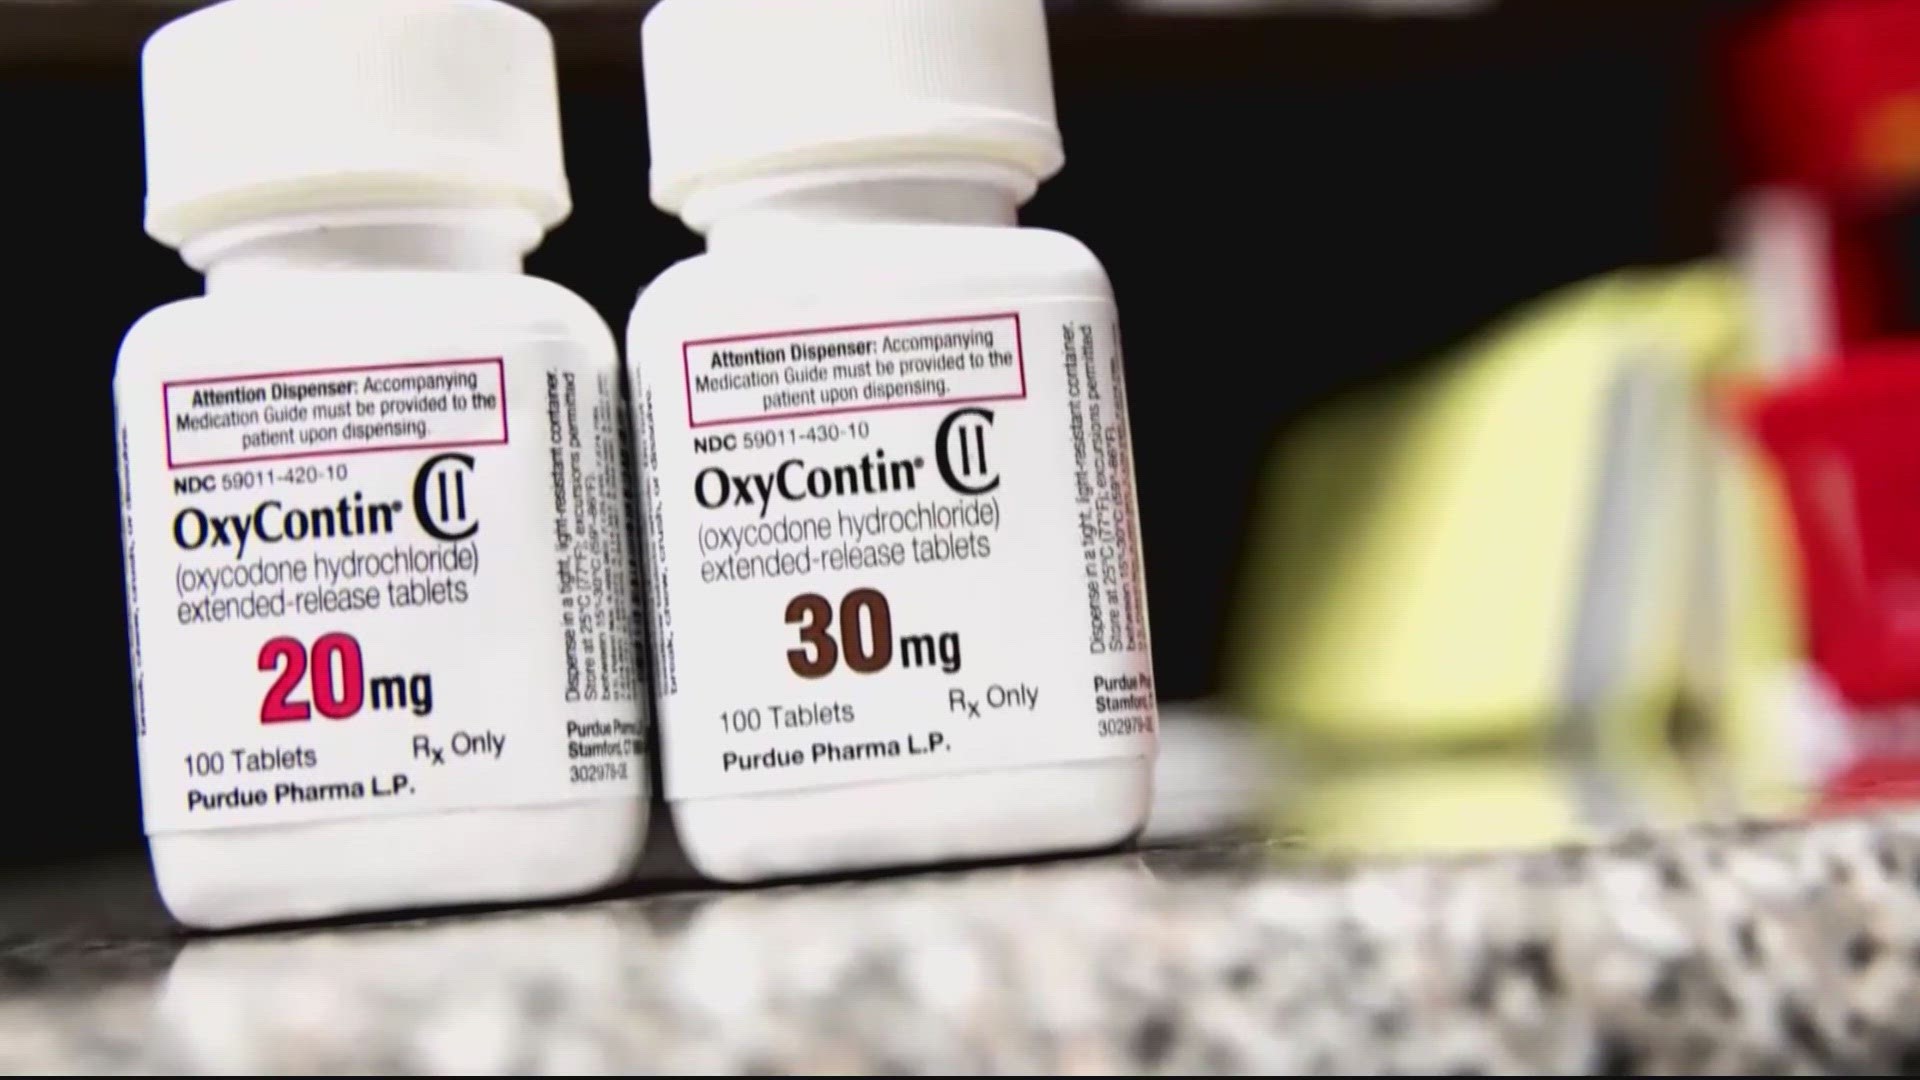 The Supreme Court is hearing arguments over a nationwide settlement with OxyContin maker Purdue Pharma that would shield members of the Sackler family.